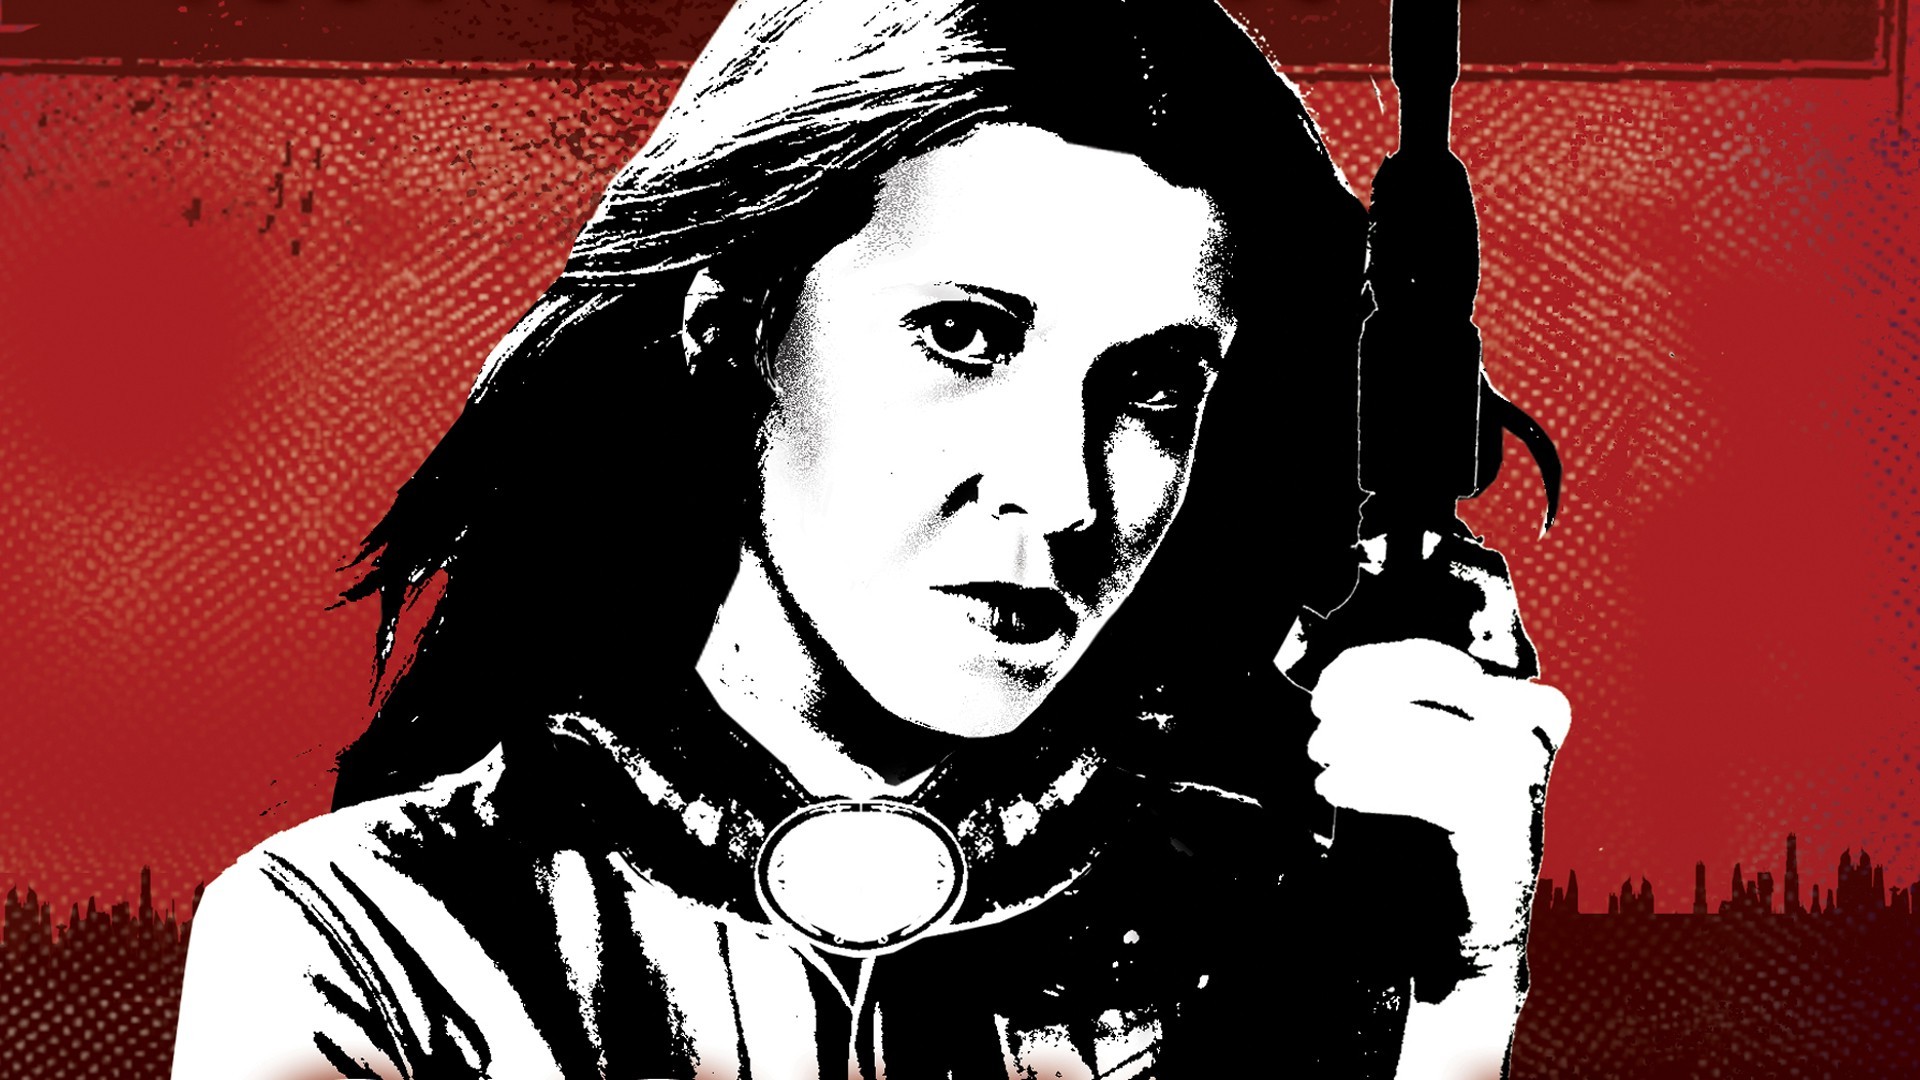 Movies Star Wars Leia Organa Carrie Fisher Wallpapers Hd